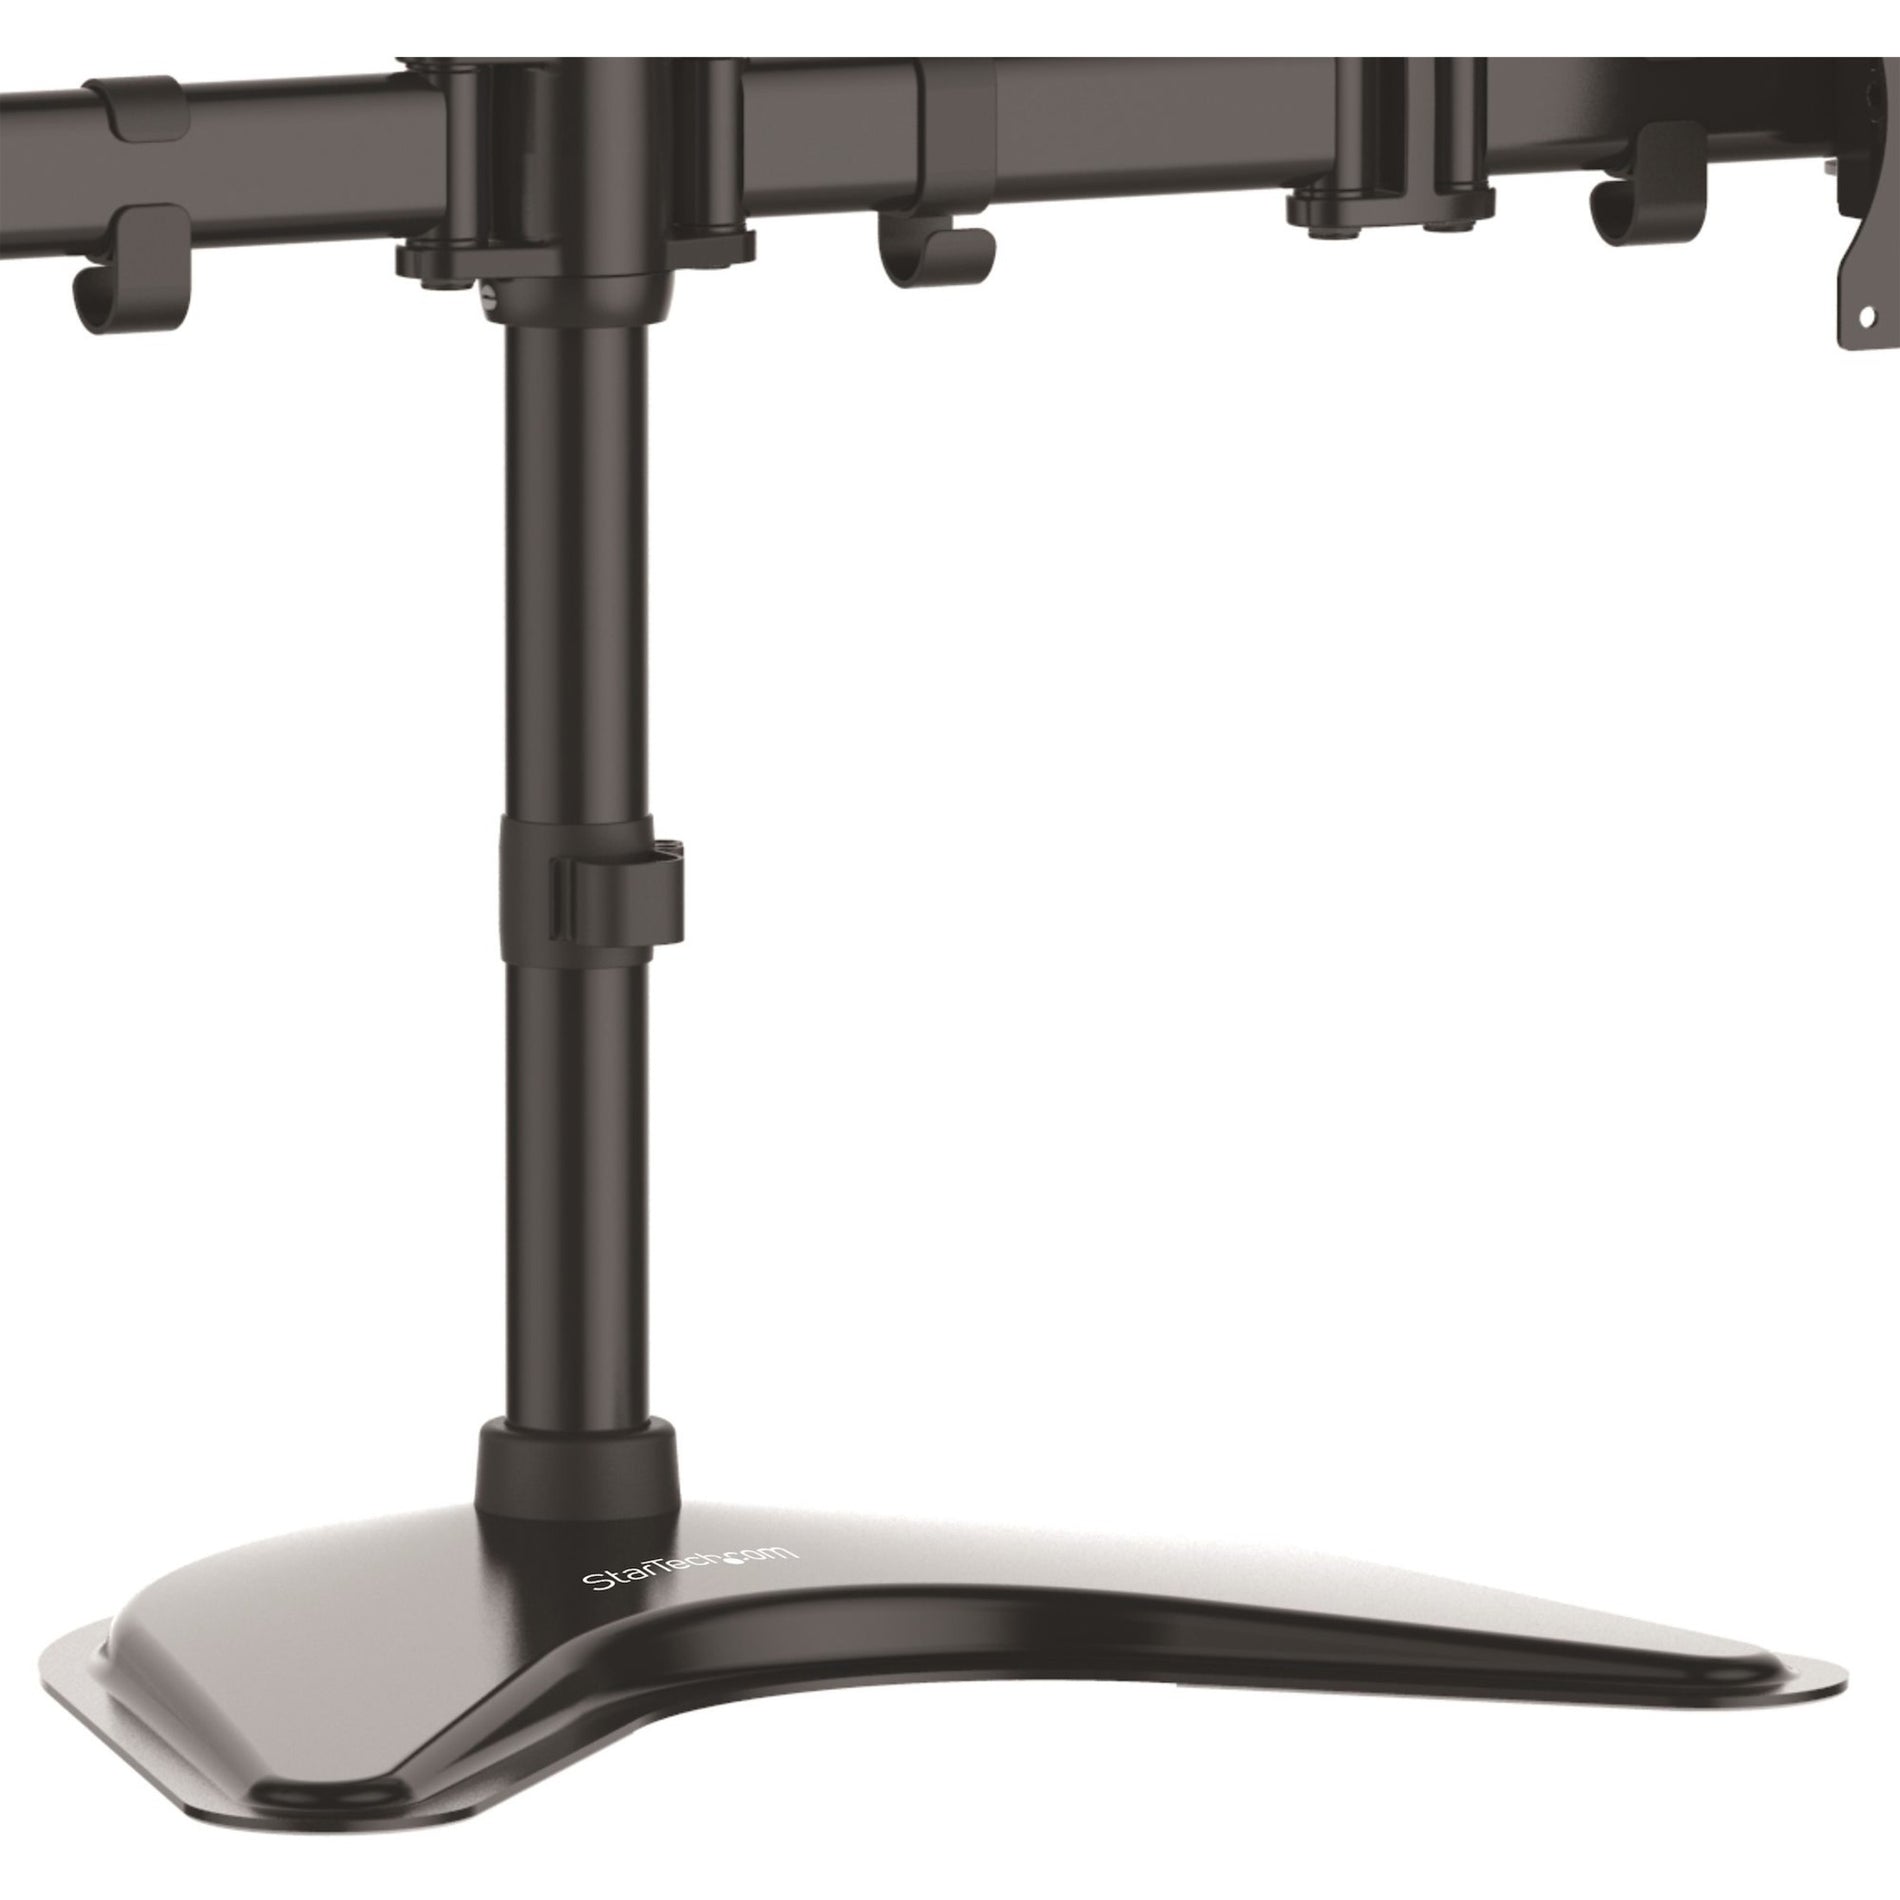 StarTech.com ARMBARQUAD Quad-Monitor Desktop Stand - Adjustable 4 Monitor Stand, VESA Mount, Up to 27in, Heavy Duty Steel